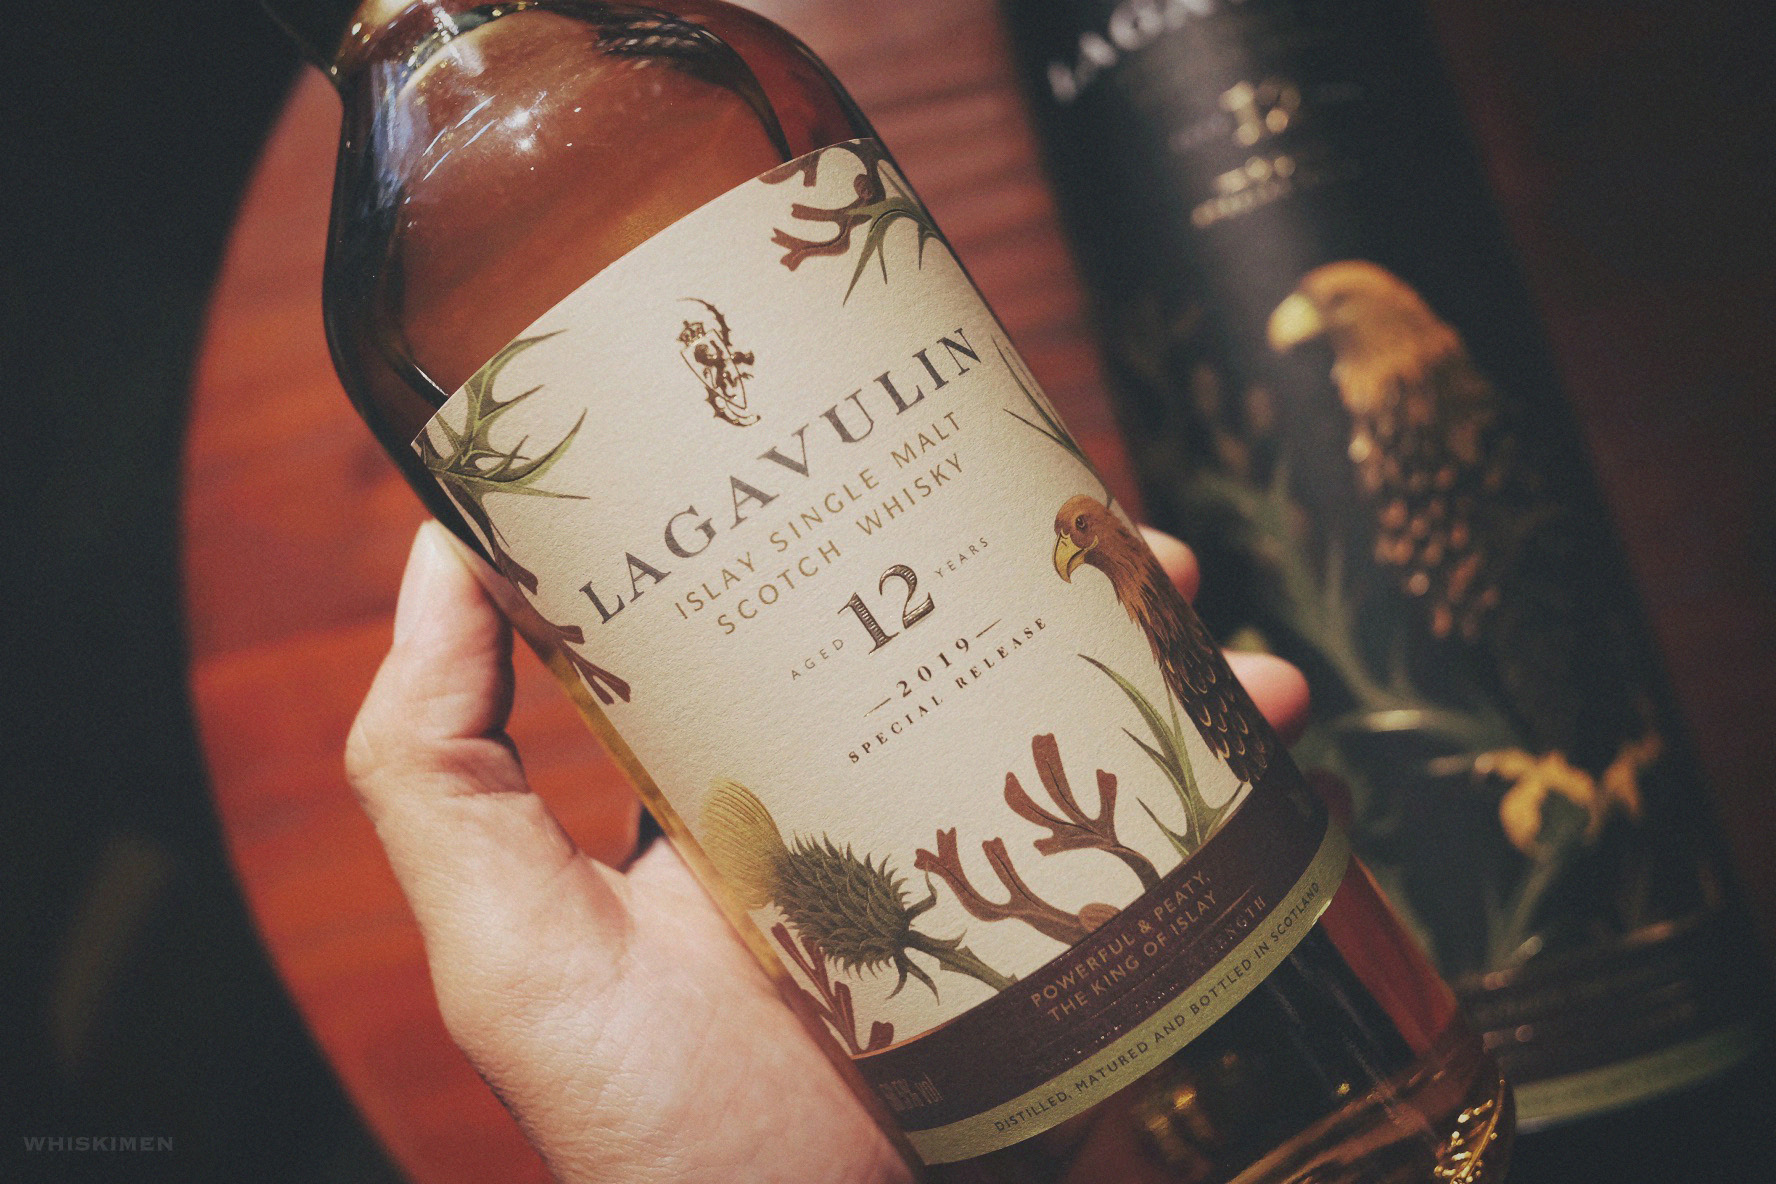 Lagavulin 12 Year Old Natural Cask Strength Single Malt Scotch Whisky (2019 Special Release)